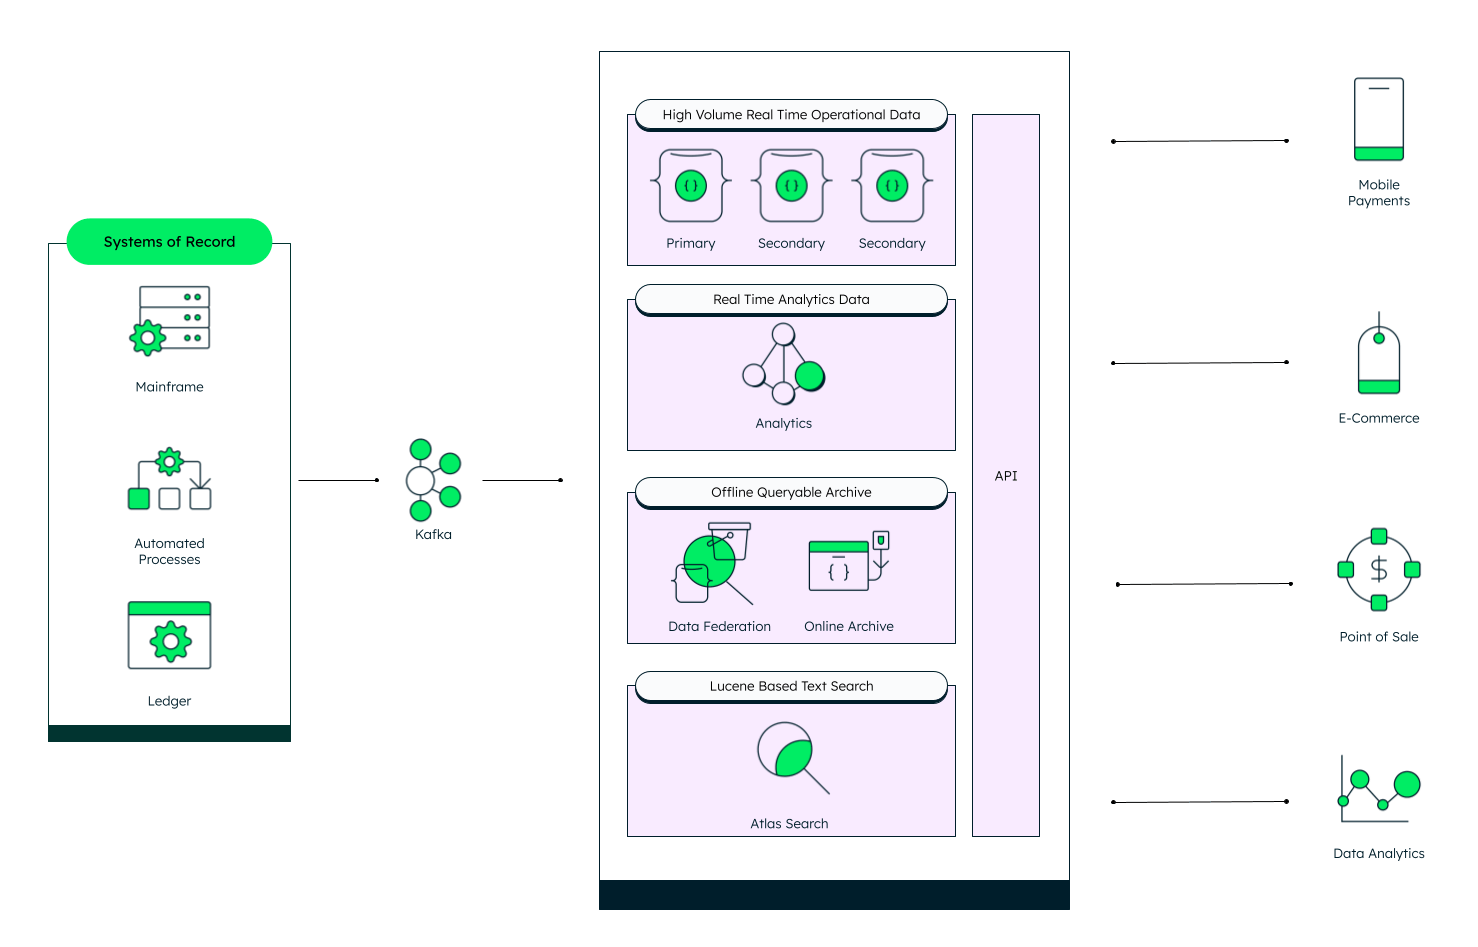 An illustration showing how to make a real time payment solution with MongoDB in an existing operational data layer.